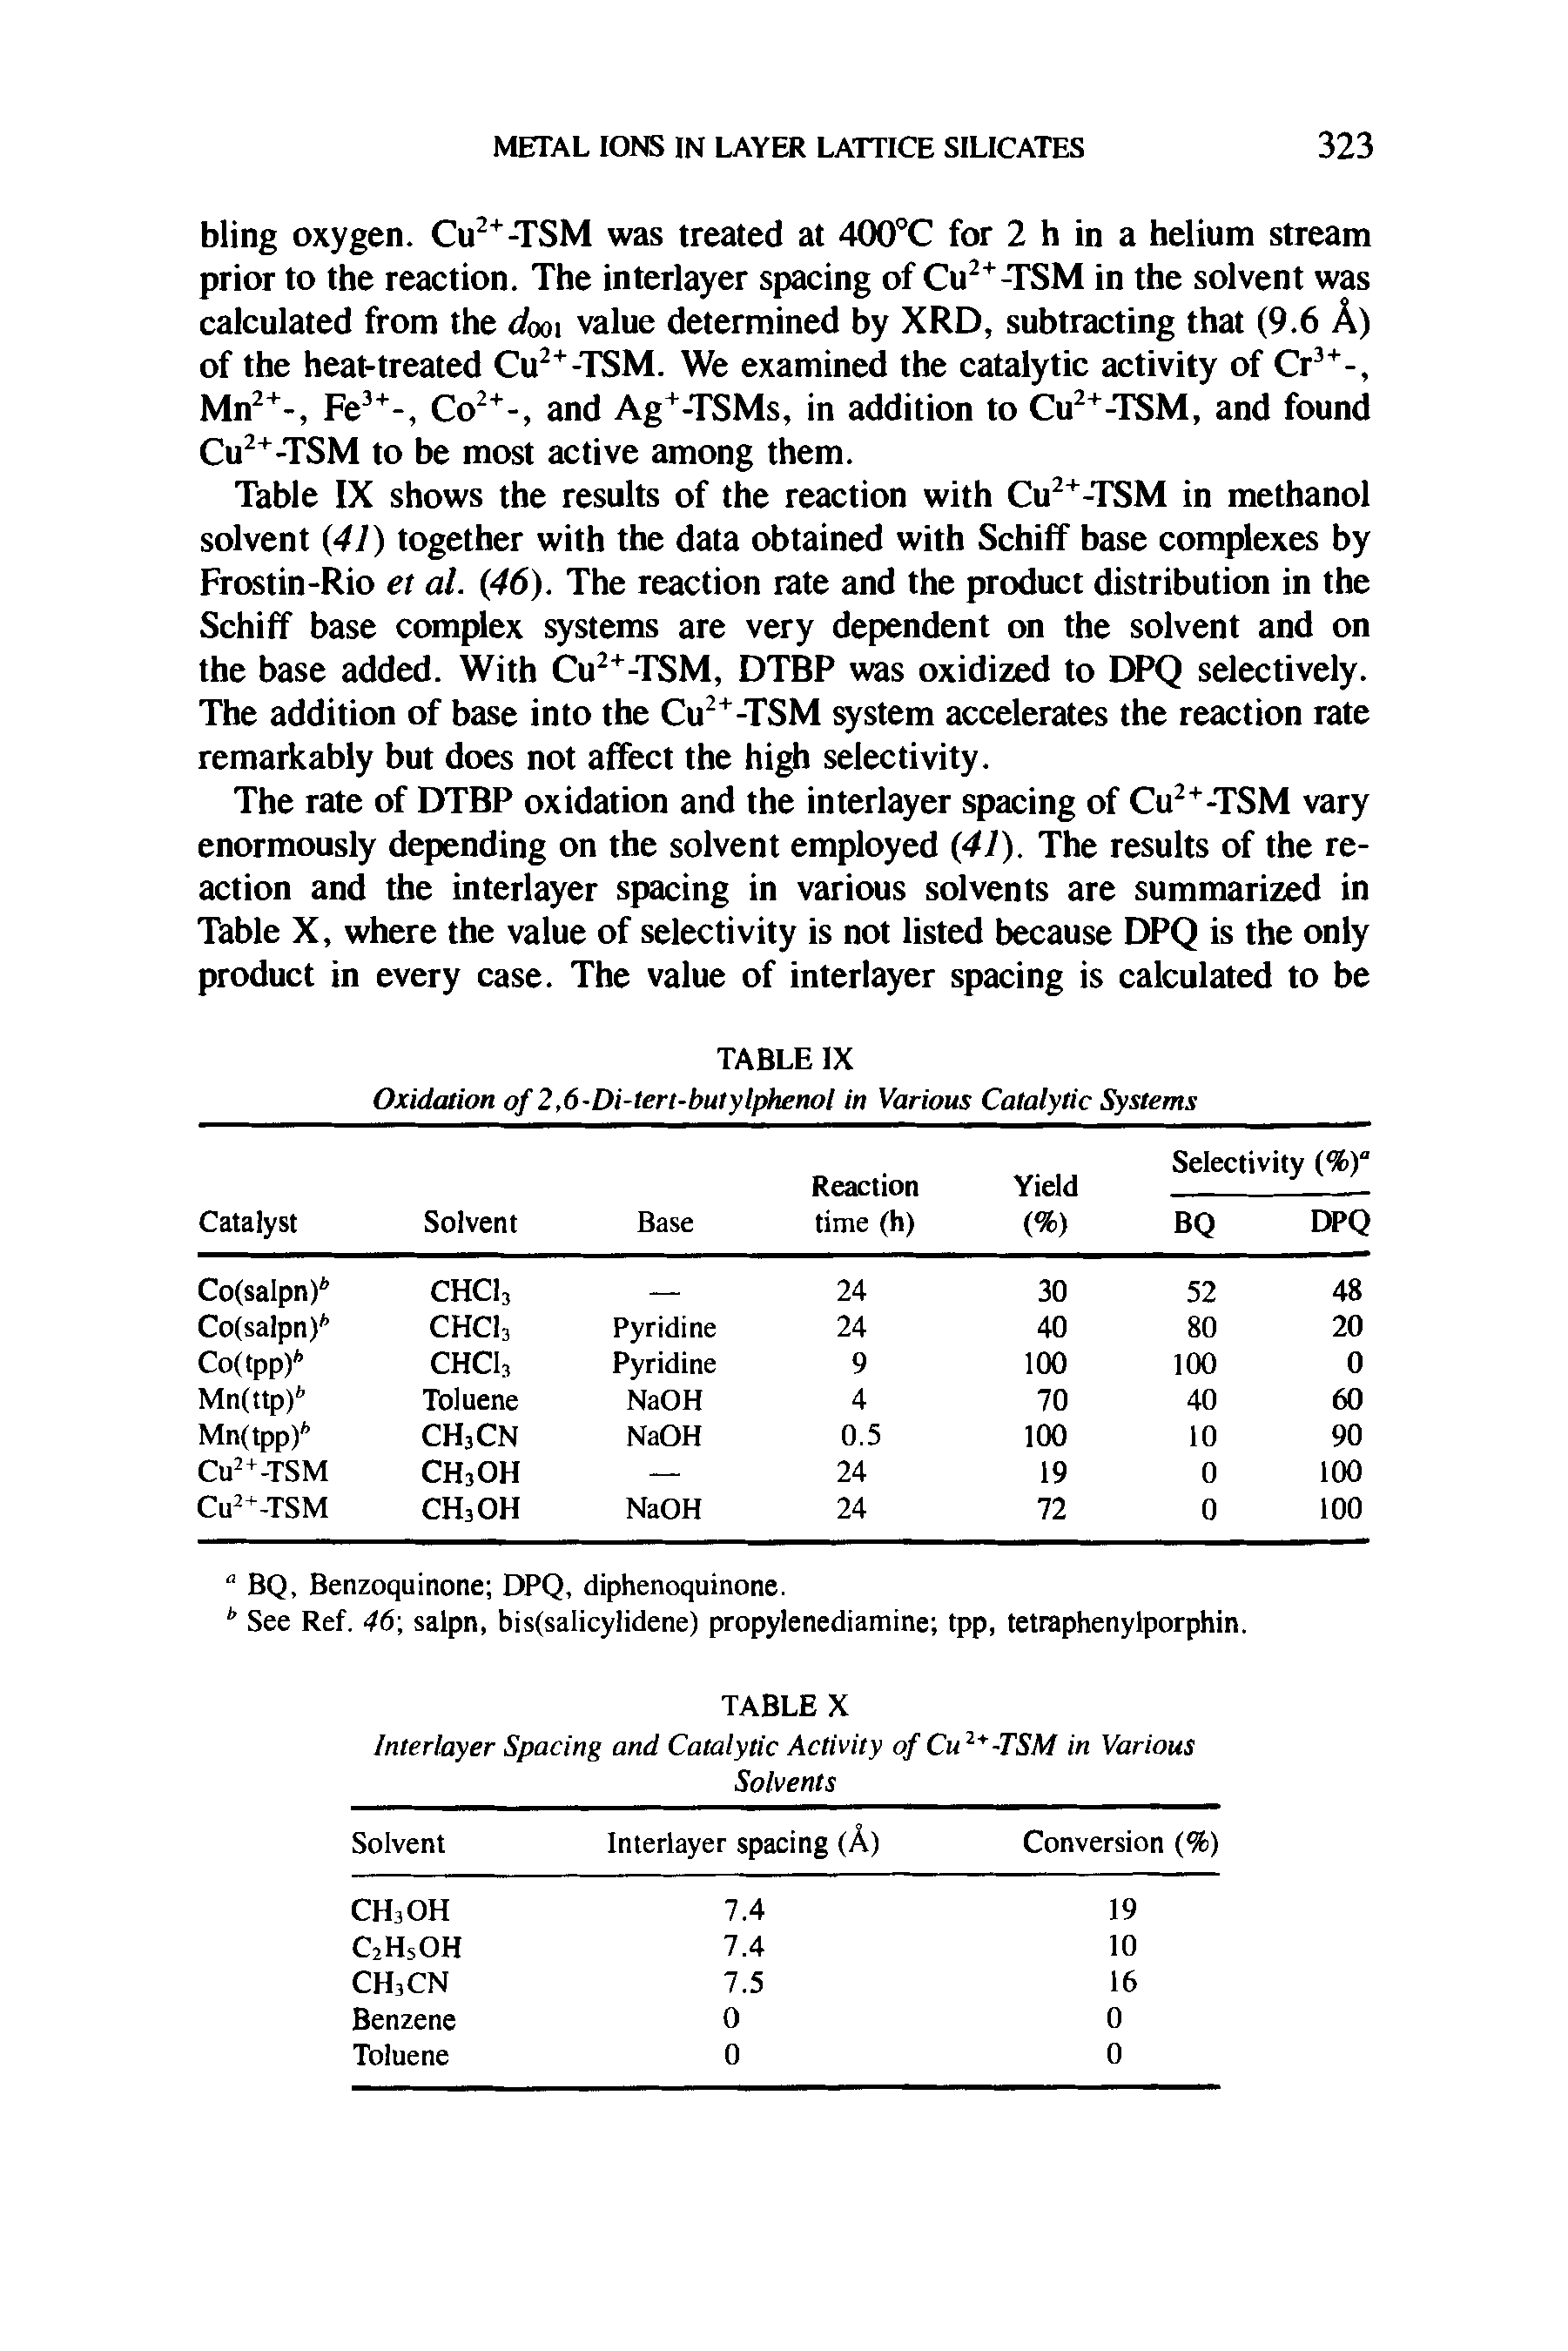 Table IX shows the results of the reaction with Cu -TSM in methanol solvent 41) together with the data obtained with Schiff base complexes by Frostin-Rio et al. (46). The reaction rate and the product distribution in the Schiff base complex systems are very dependent on the solvent and on the base added. With Cu -TSM, DTBP was oxidized to DPQ selectively. The addition of base into the Cu -TSM system accelerates the reaction rate remarkably but does not affect the high selectivity.